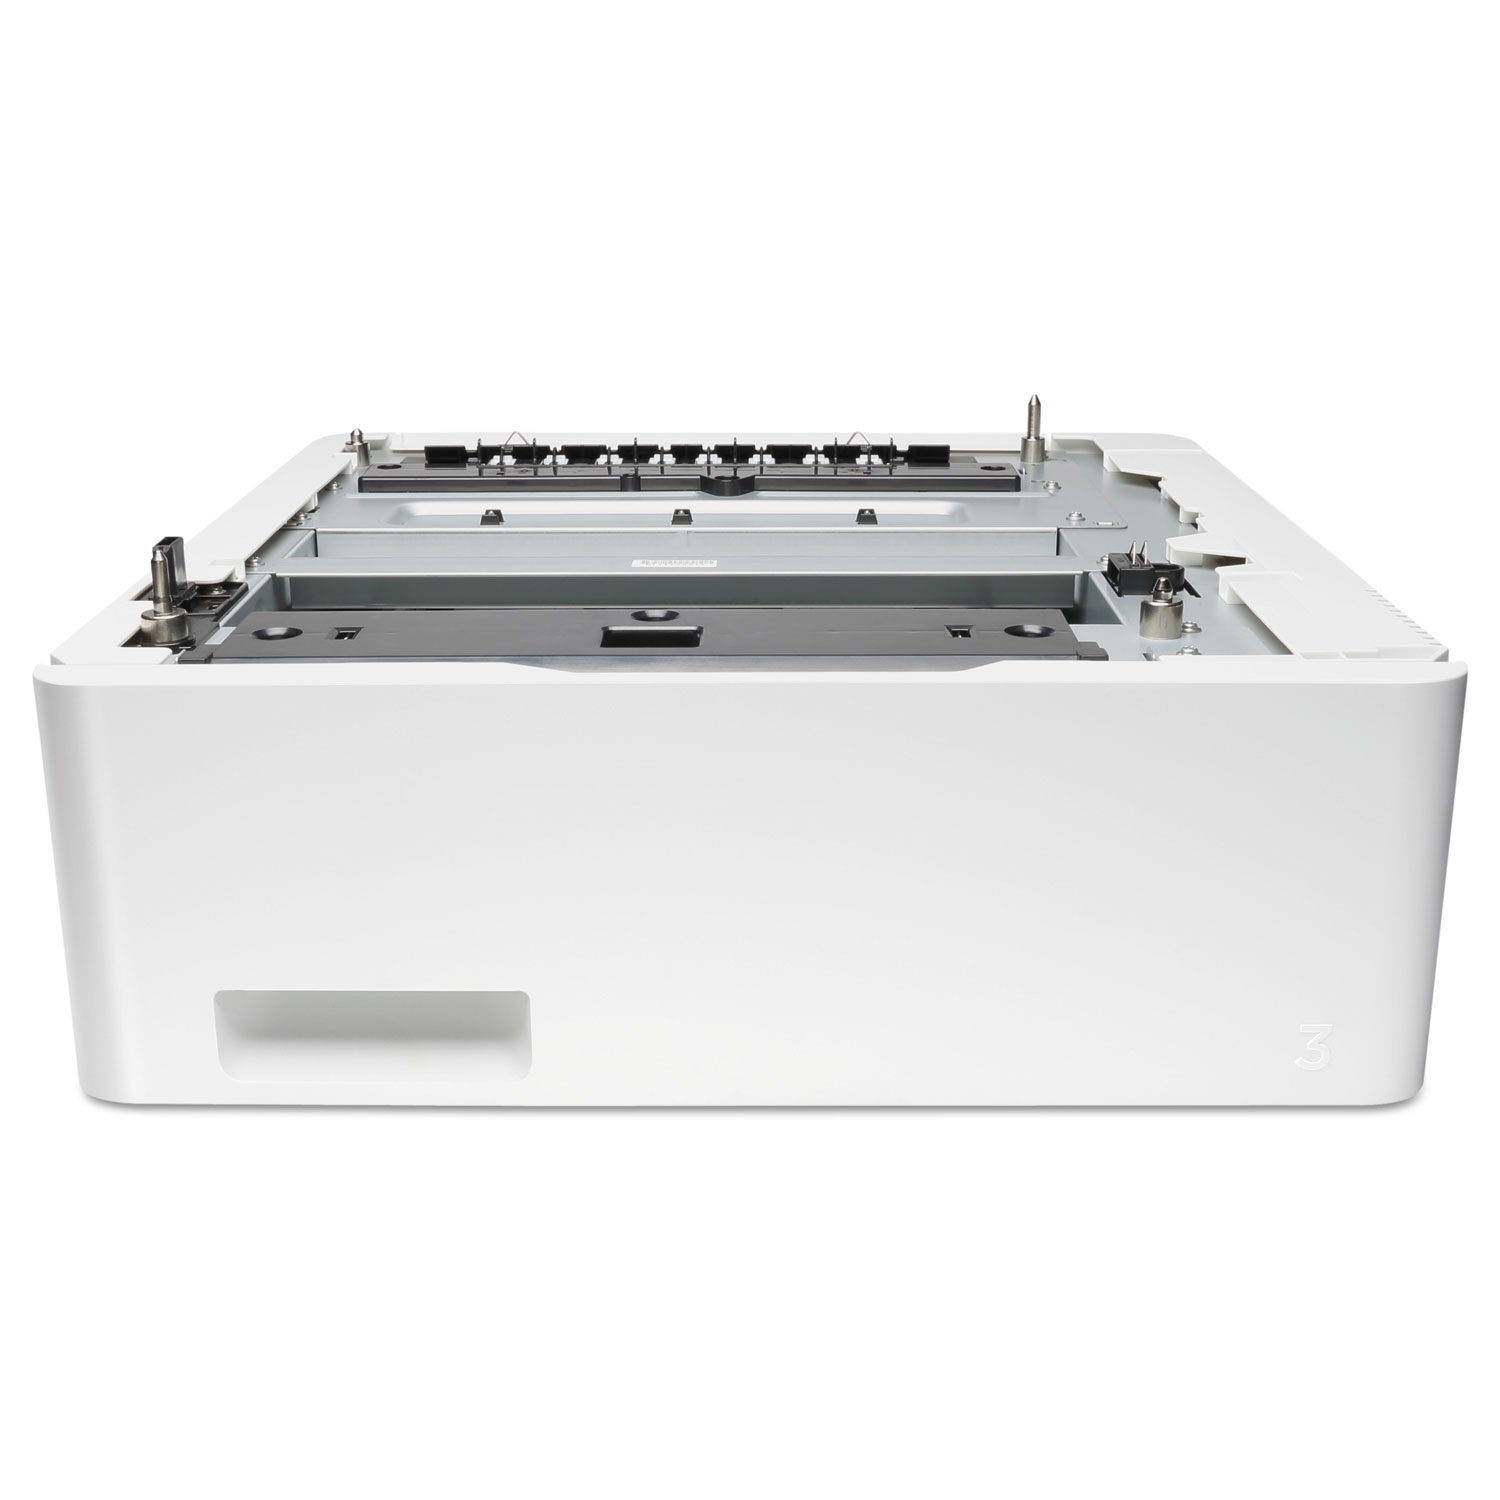 550-Sheet Feeder Tray for Color LaserJet Pro M452 Series Printers